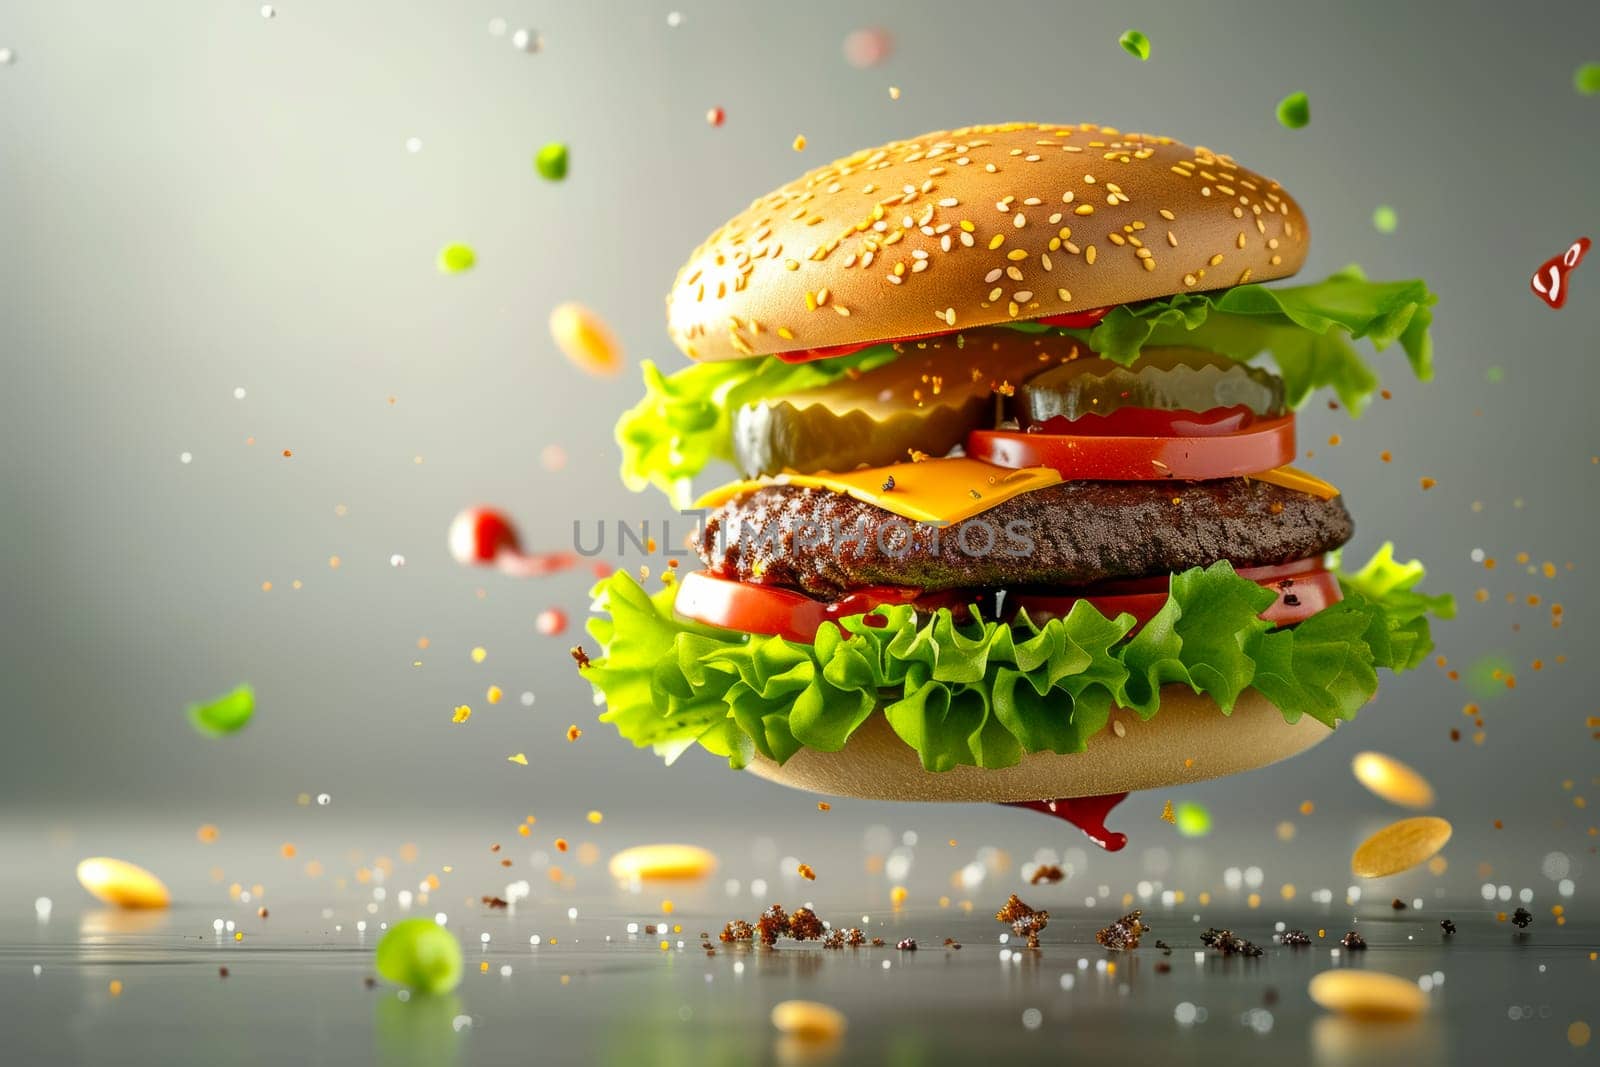 Giant Hamburger Flying With Lettuce and Tomatoes by vladimka